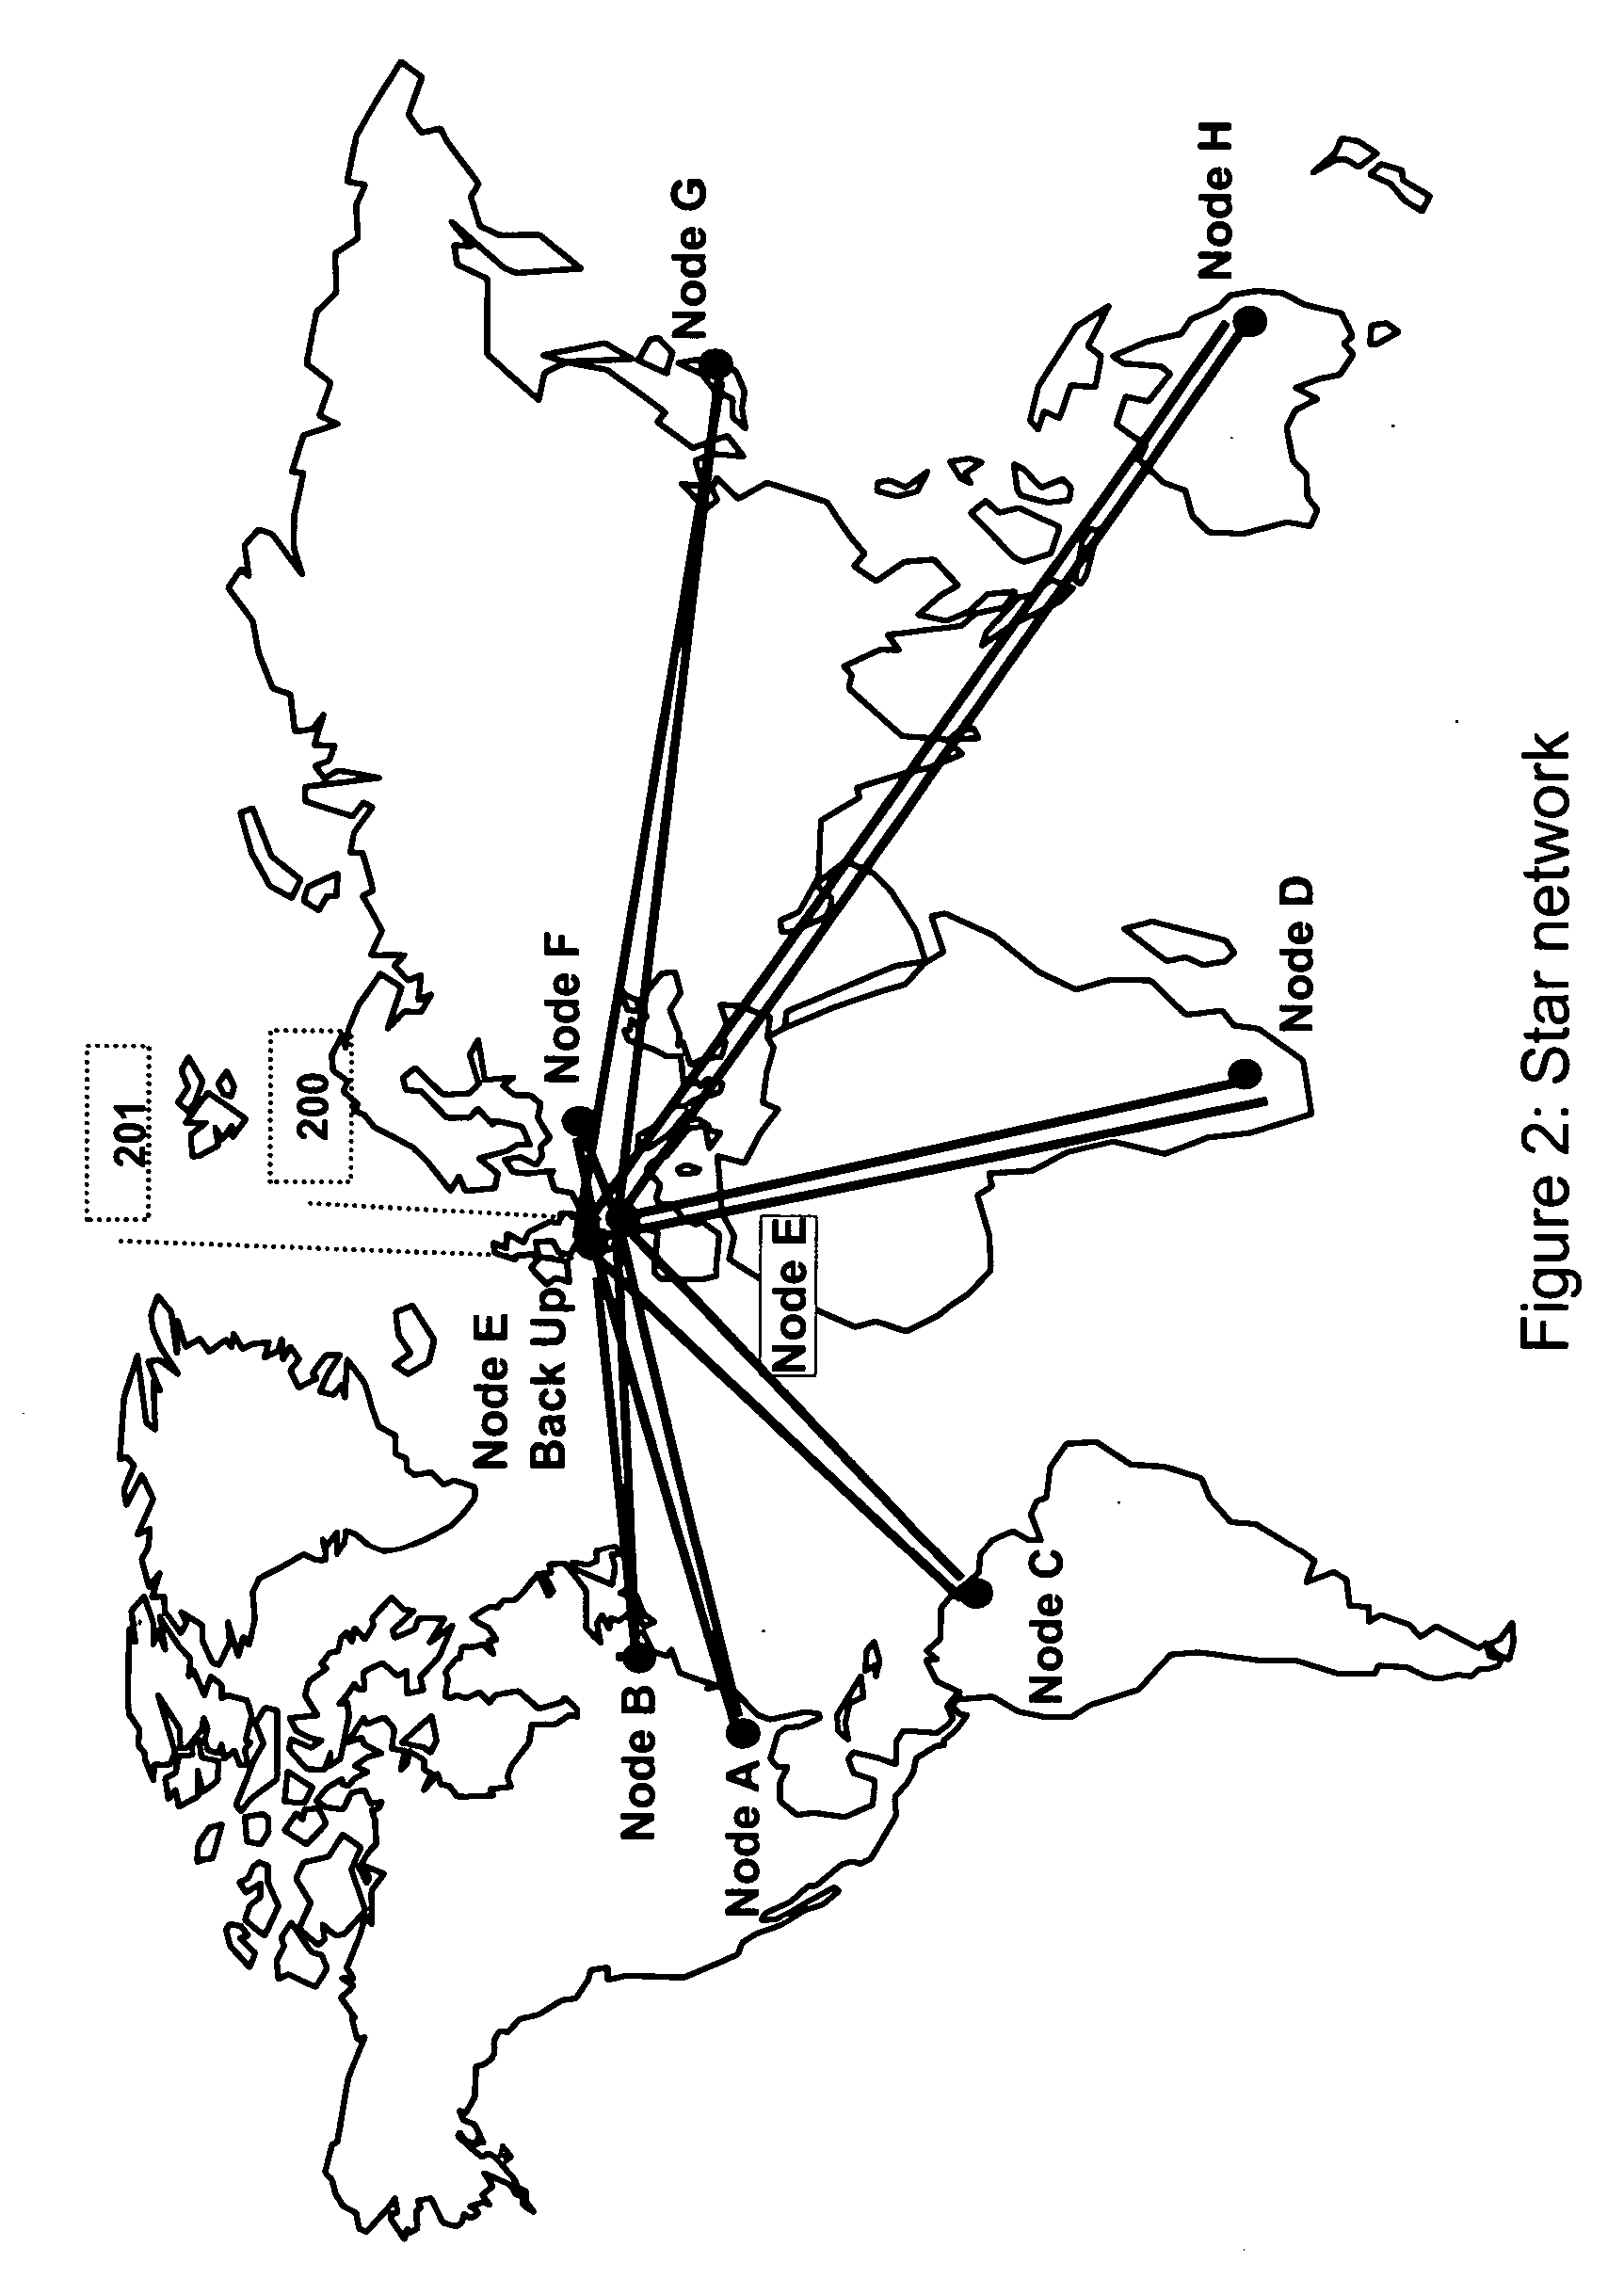 System and method for optimizing the topology of a virtual ring based upon a TCP/IP network